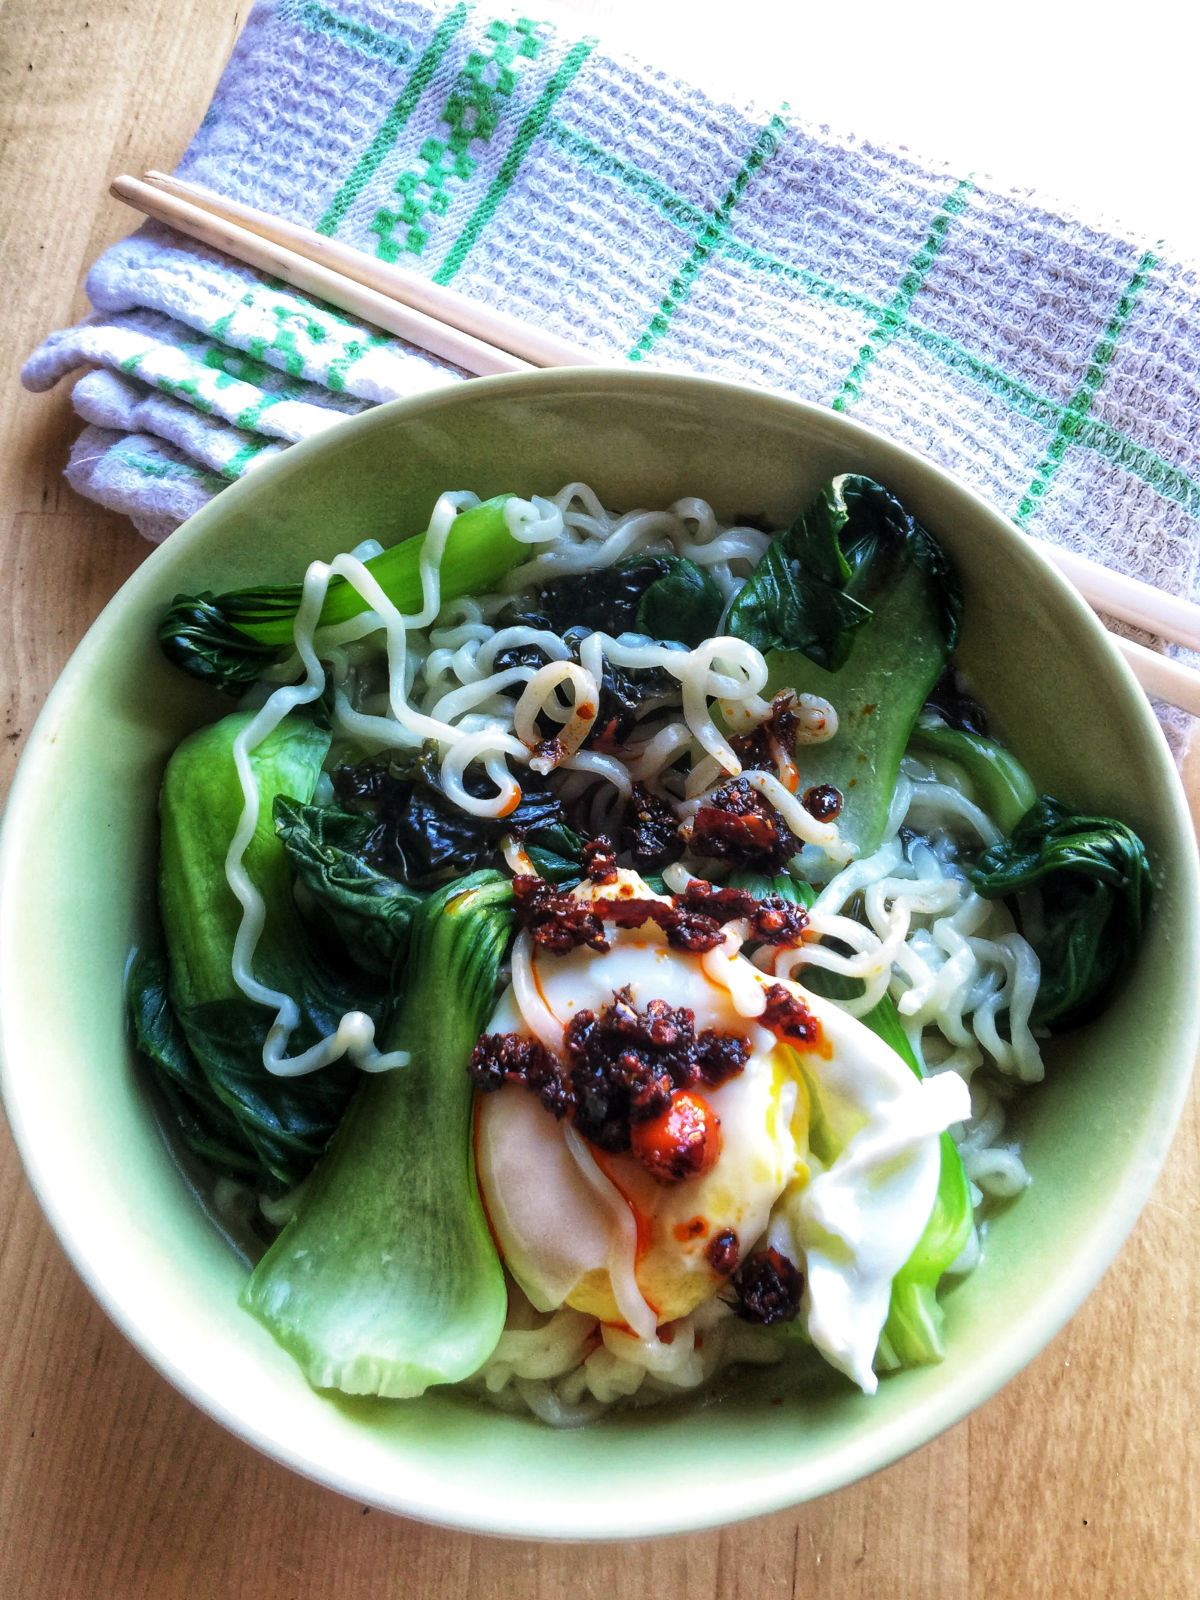 Overhead view of cooked instant noodle soup in a green bowl with 1 teaspoon LaoGanMa chili crisp on top, next to a pair of chopsticks on the table.